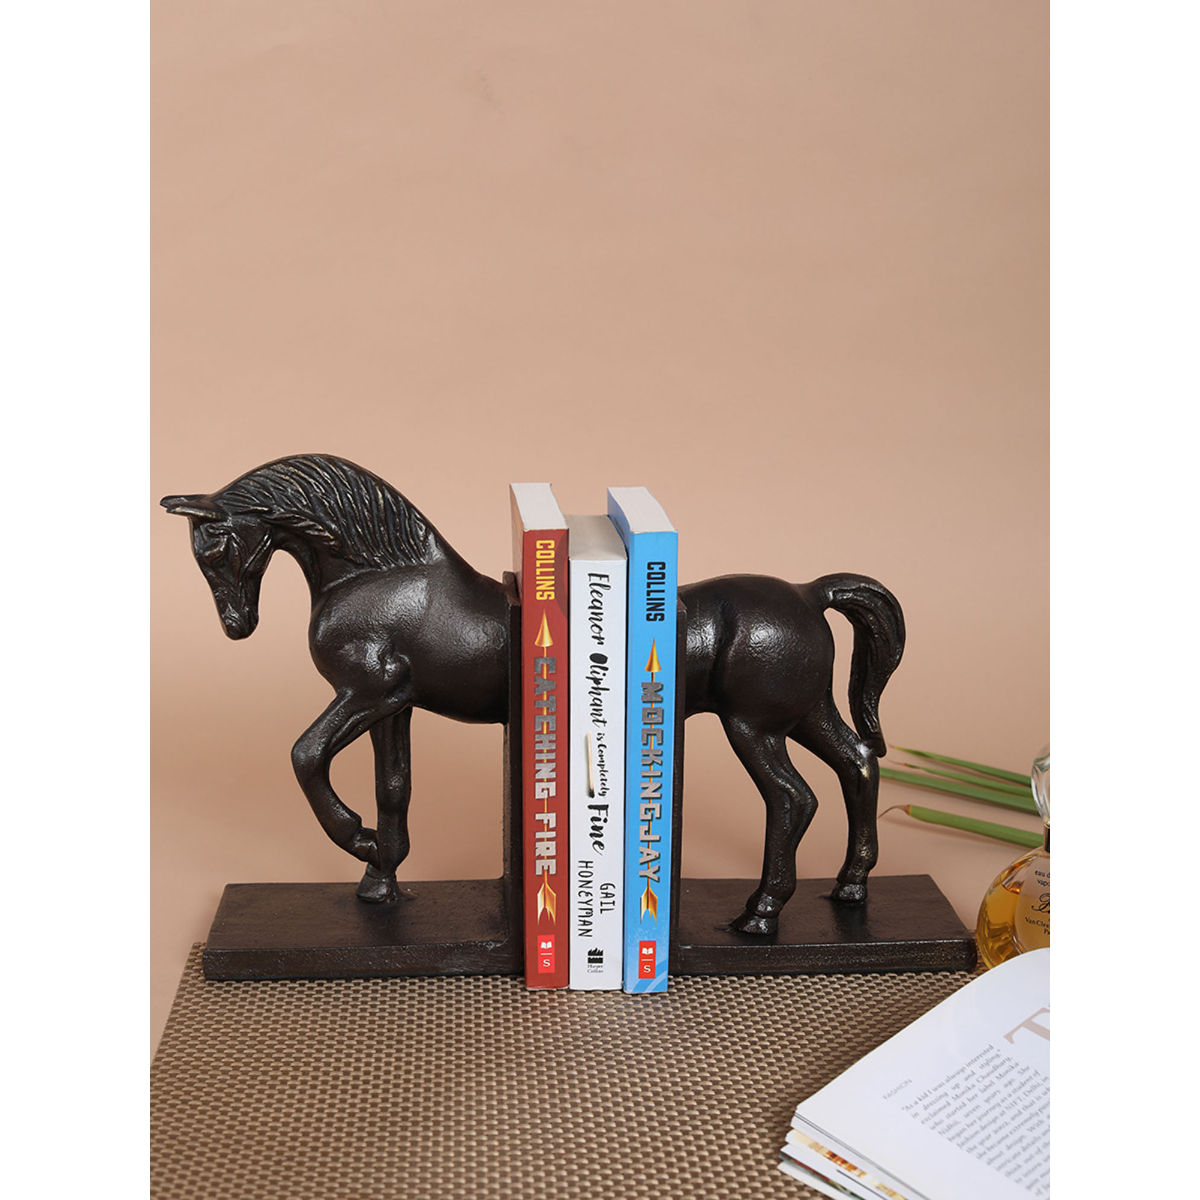 at　Ends:　Buy　Nykaa　Ends　Aluminum　Book　Antique　Brown　Book　Horse　Aluminum　Best　Horse　Brown　India　Assemblage　Assemblage　Price　Antique　Online　in